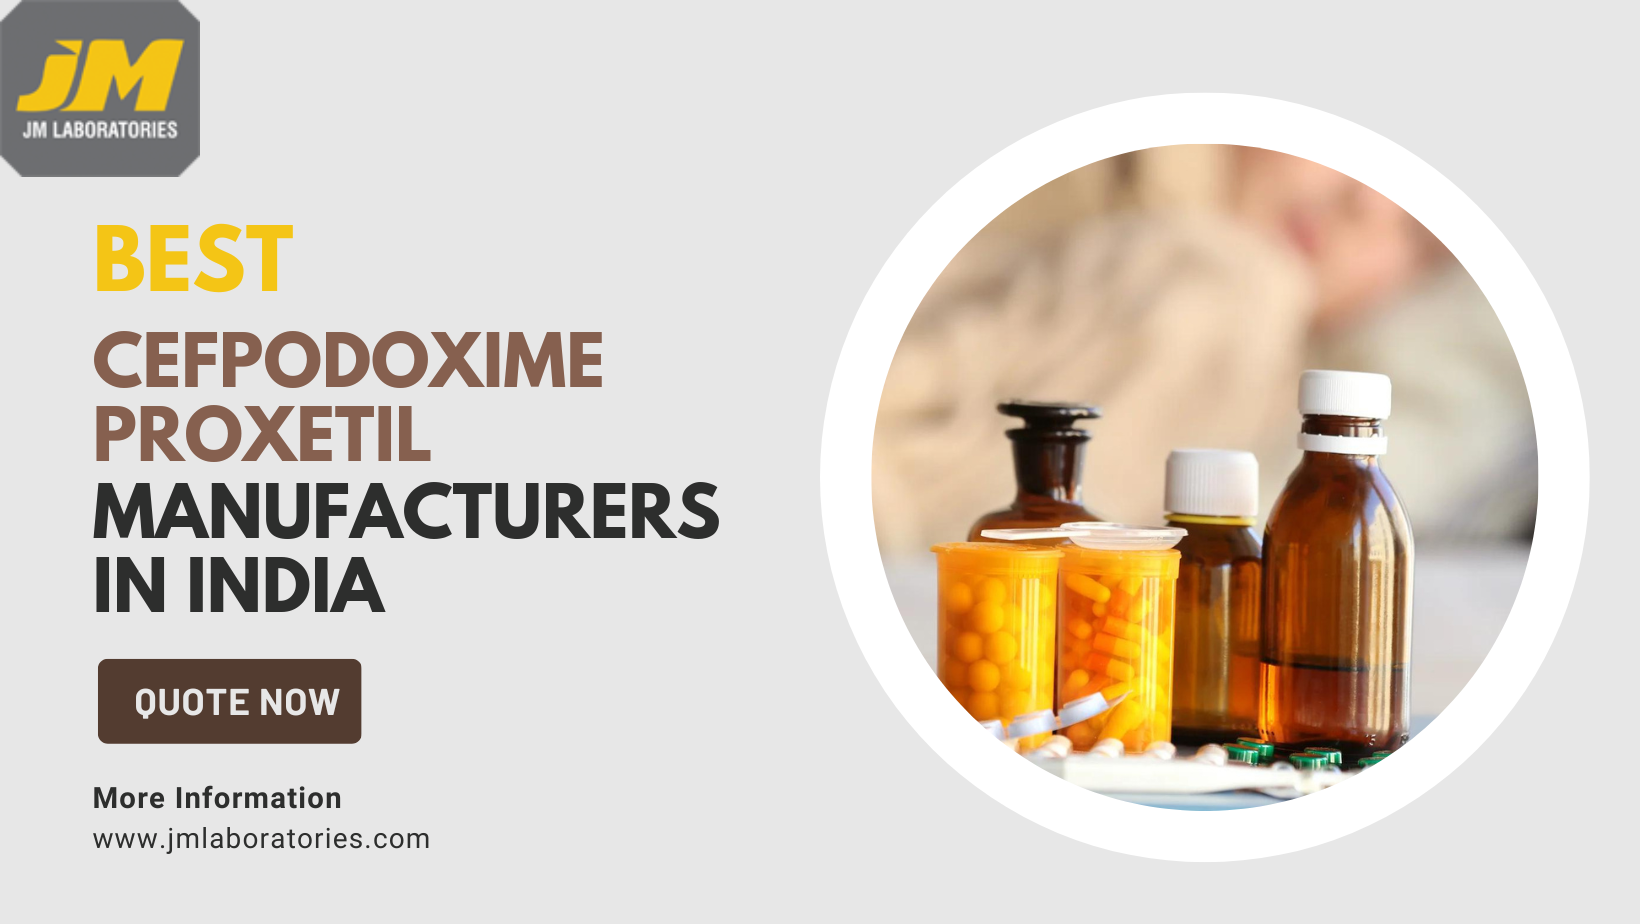 Cefpodoxime Proxetil Manufacturing Company in India | JM laboratories